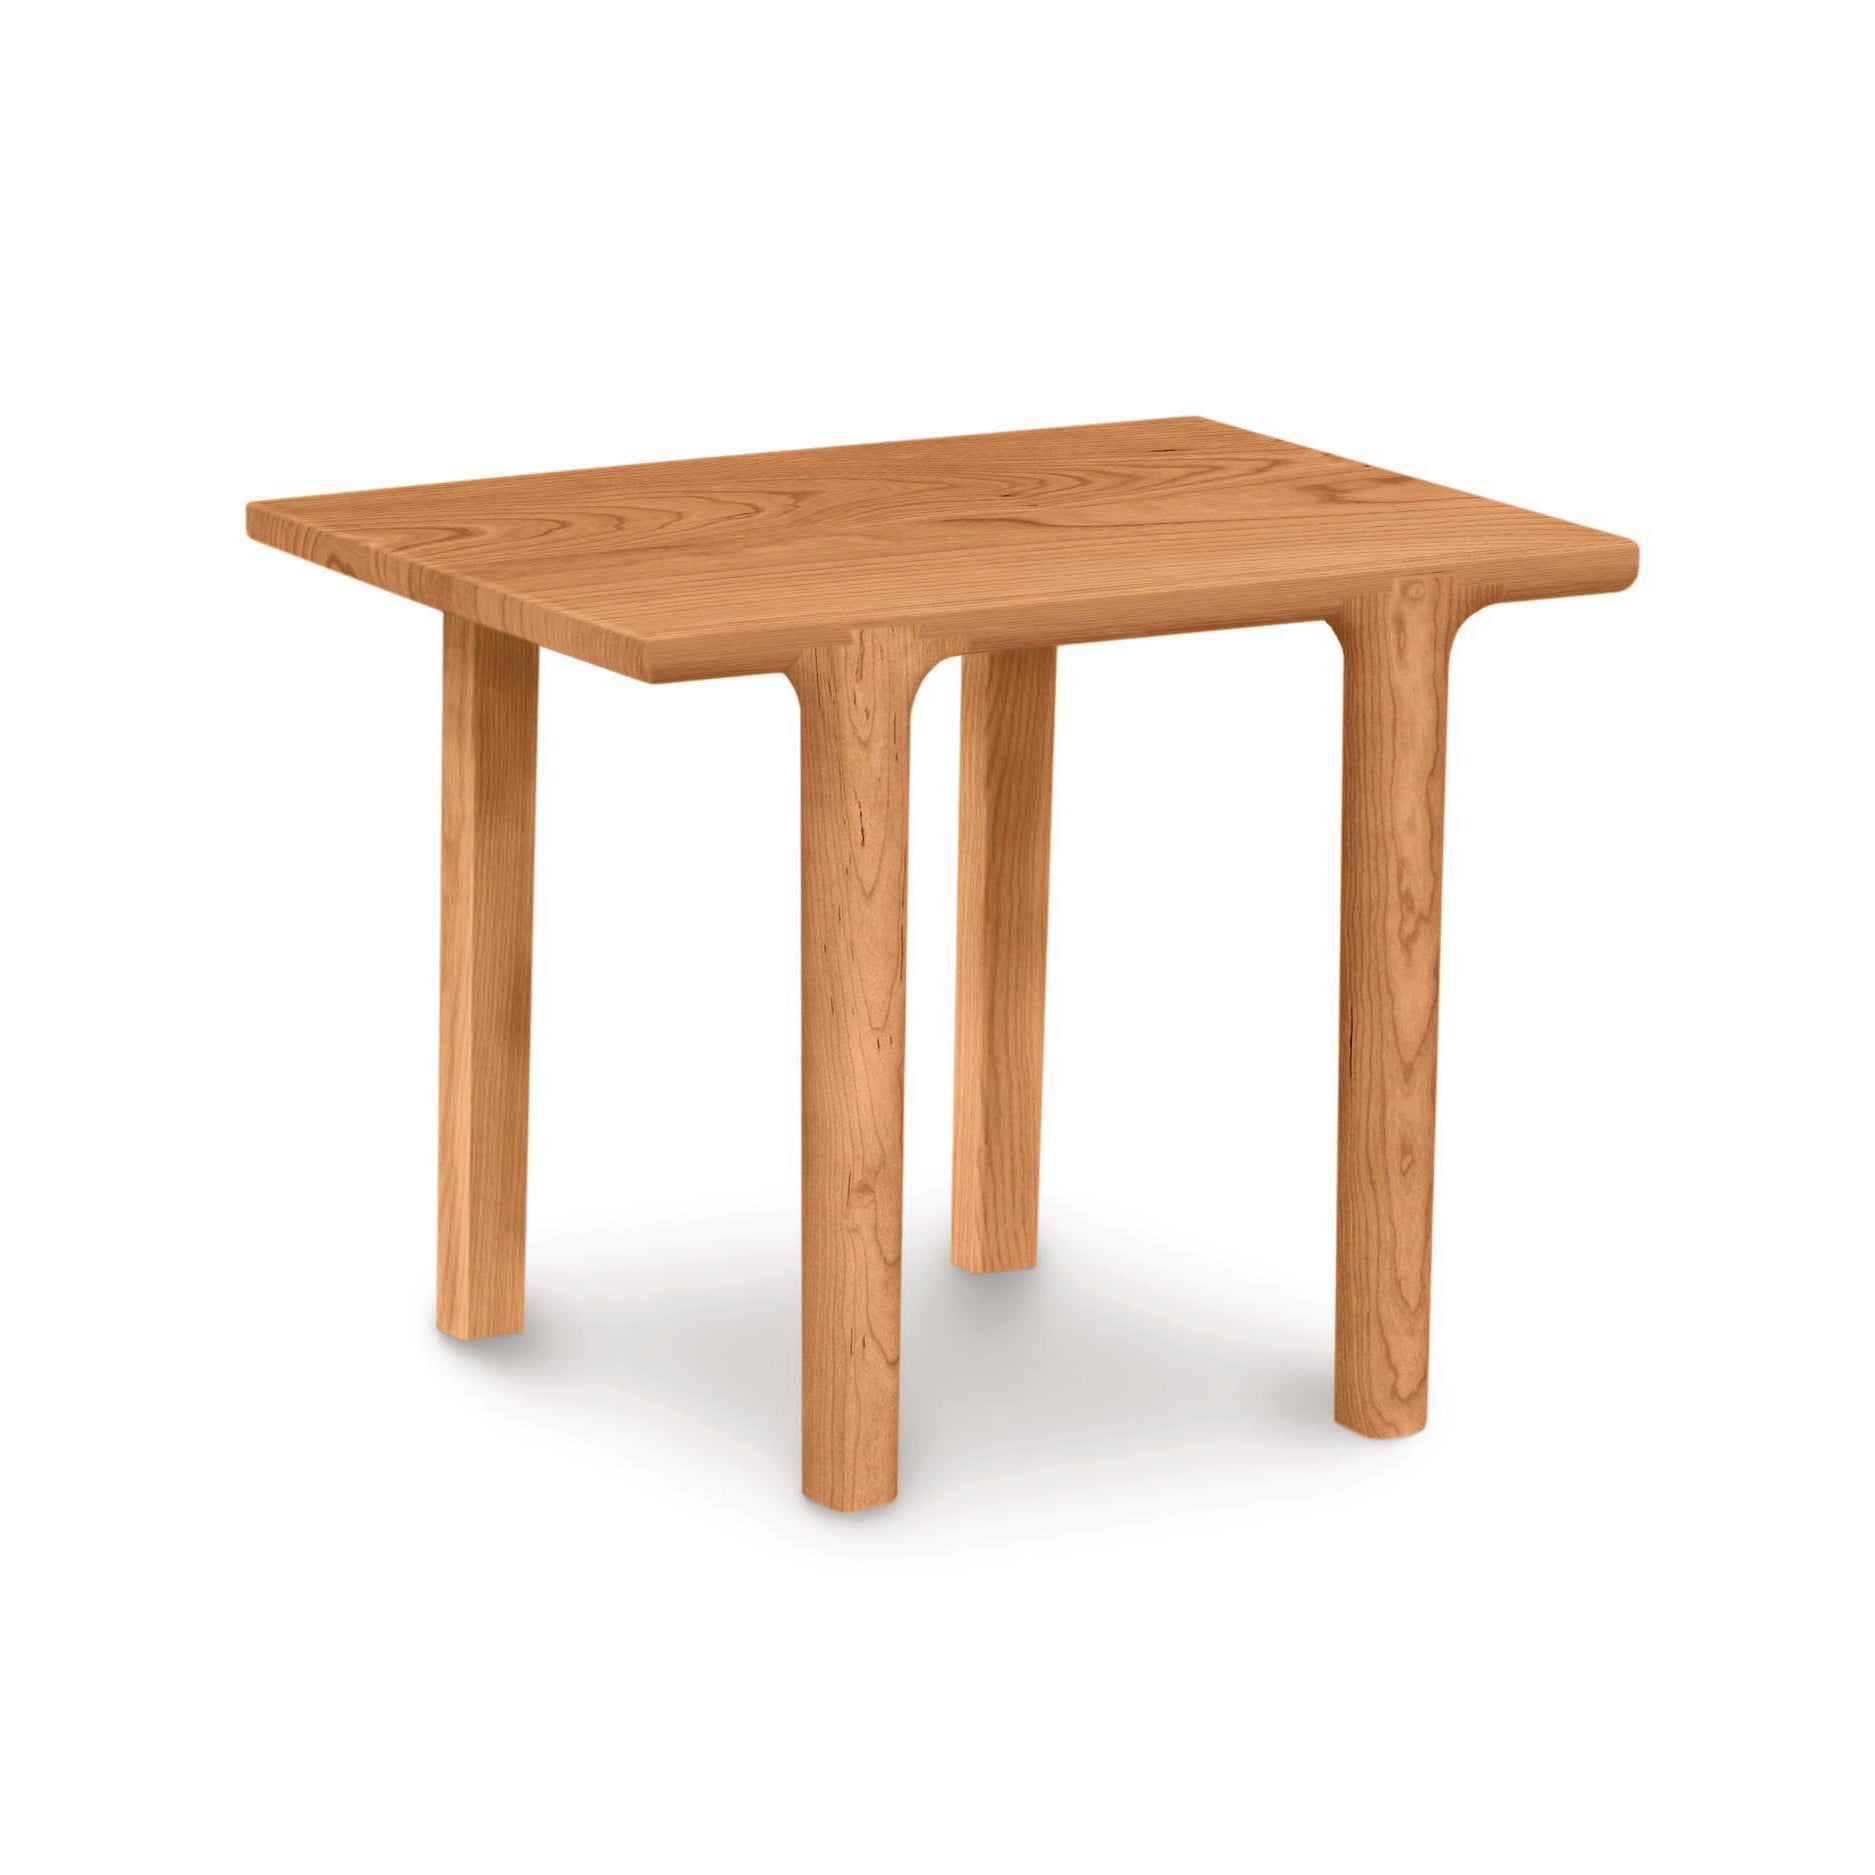 The Copeland Furniture Sierra Rectangular End Table is a small wooden table with two legs that exudes a modern personality. It stands gracefully on a white background, creating a stylish and chic look.